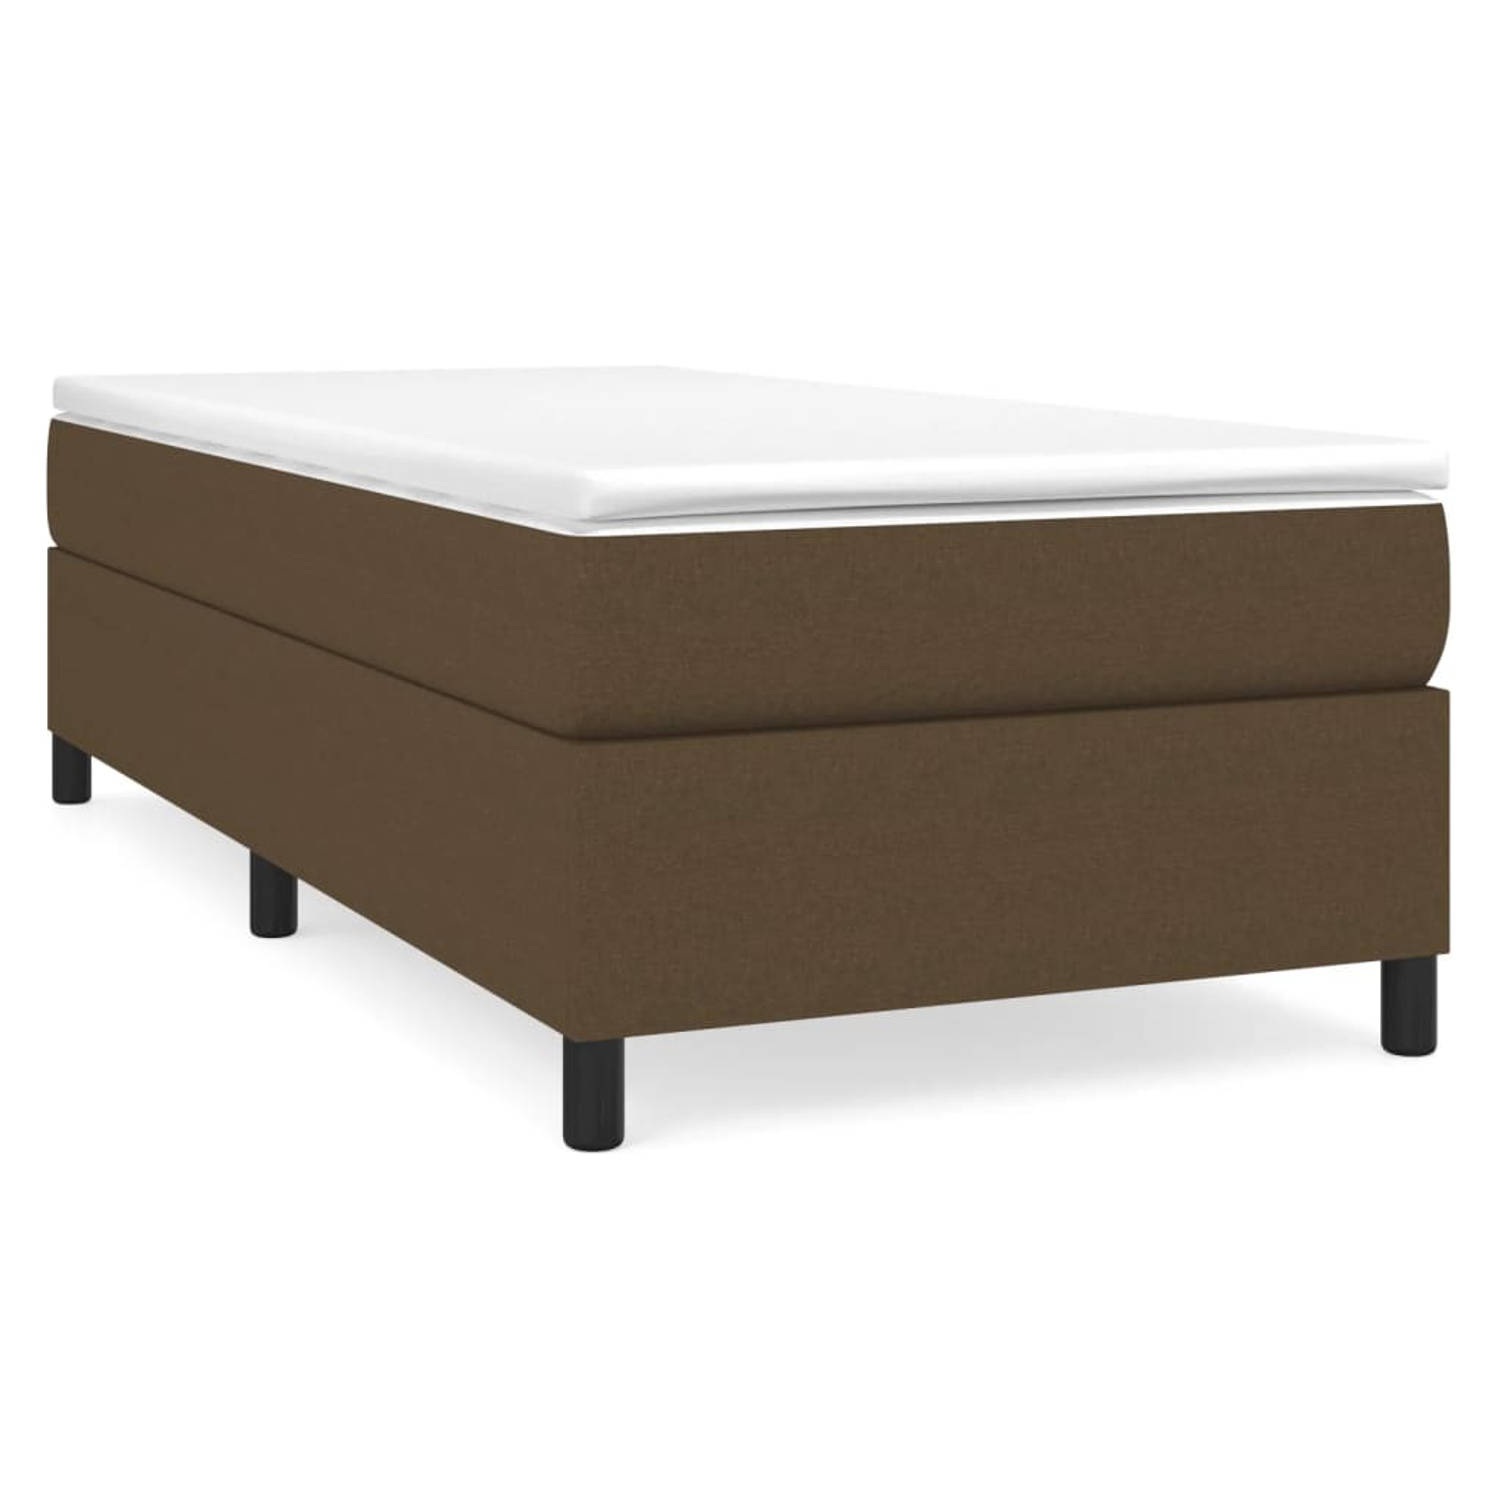 The Living Store Boxspringbed - Classic s - Bedden - 193 x 90 x 35 cm - Duurzaam - Pocketvering en Middelhard support